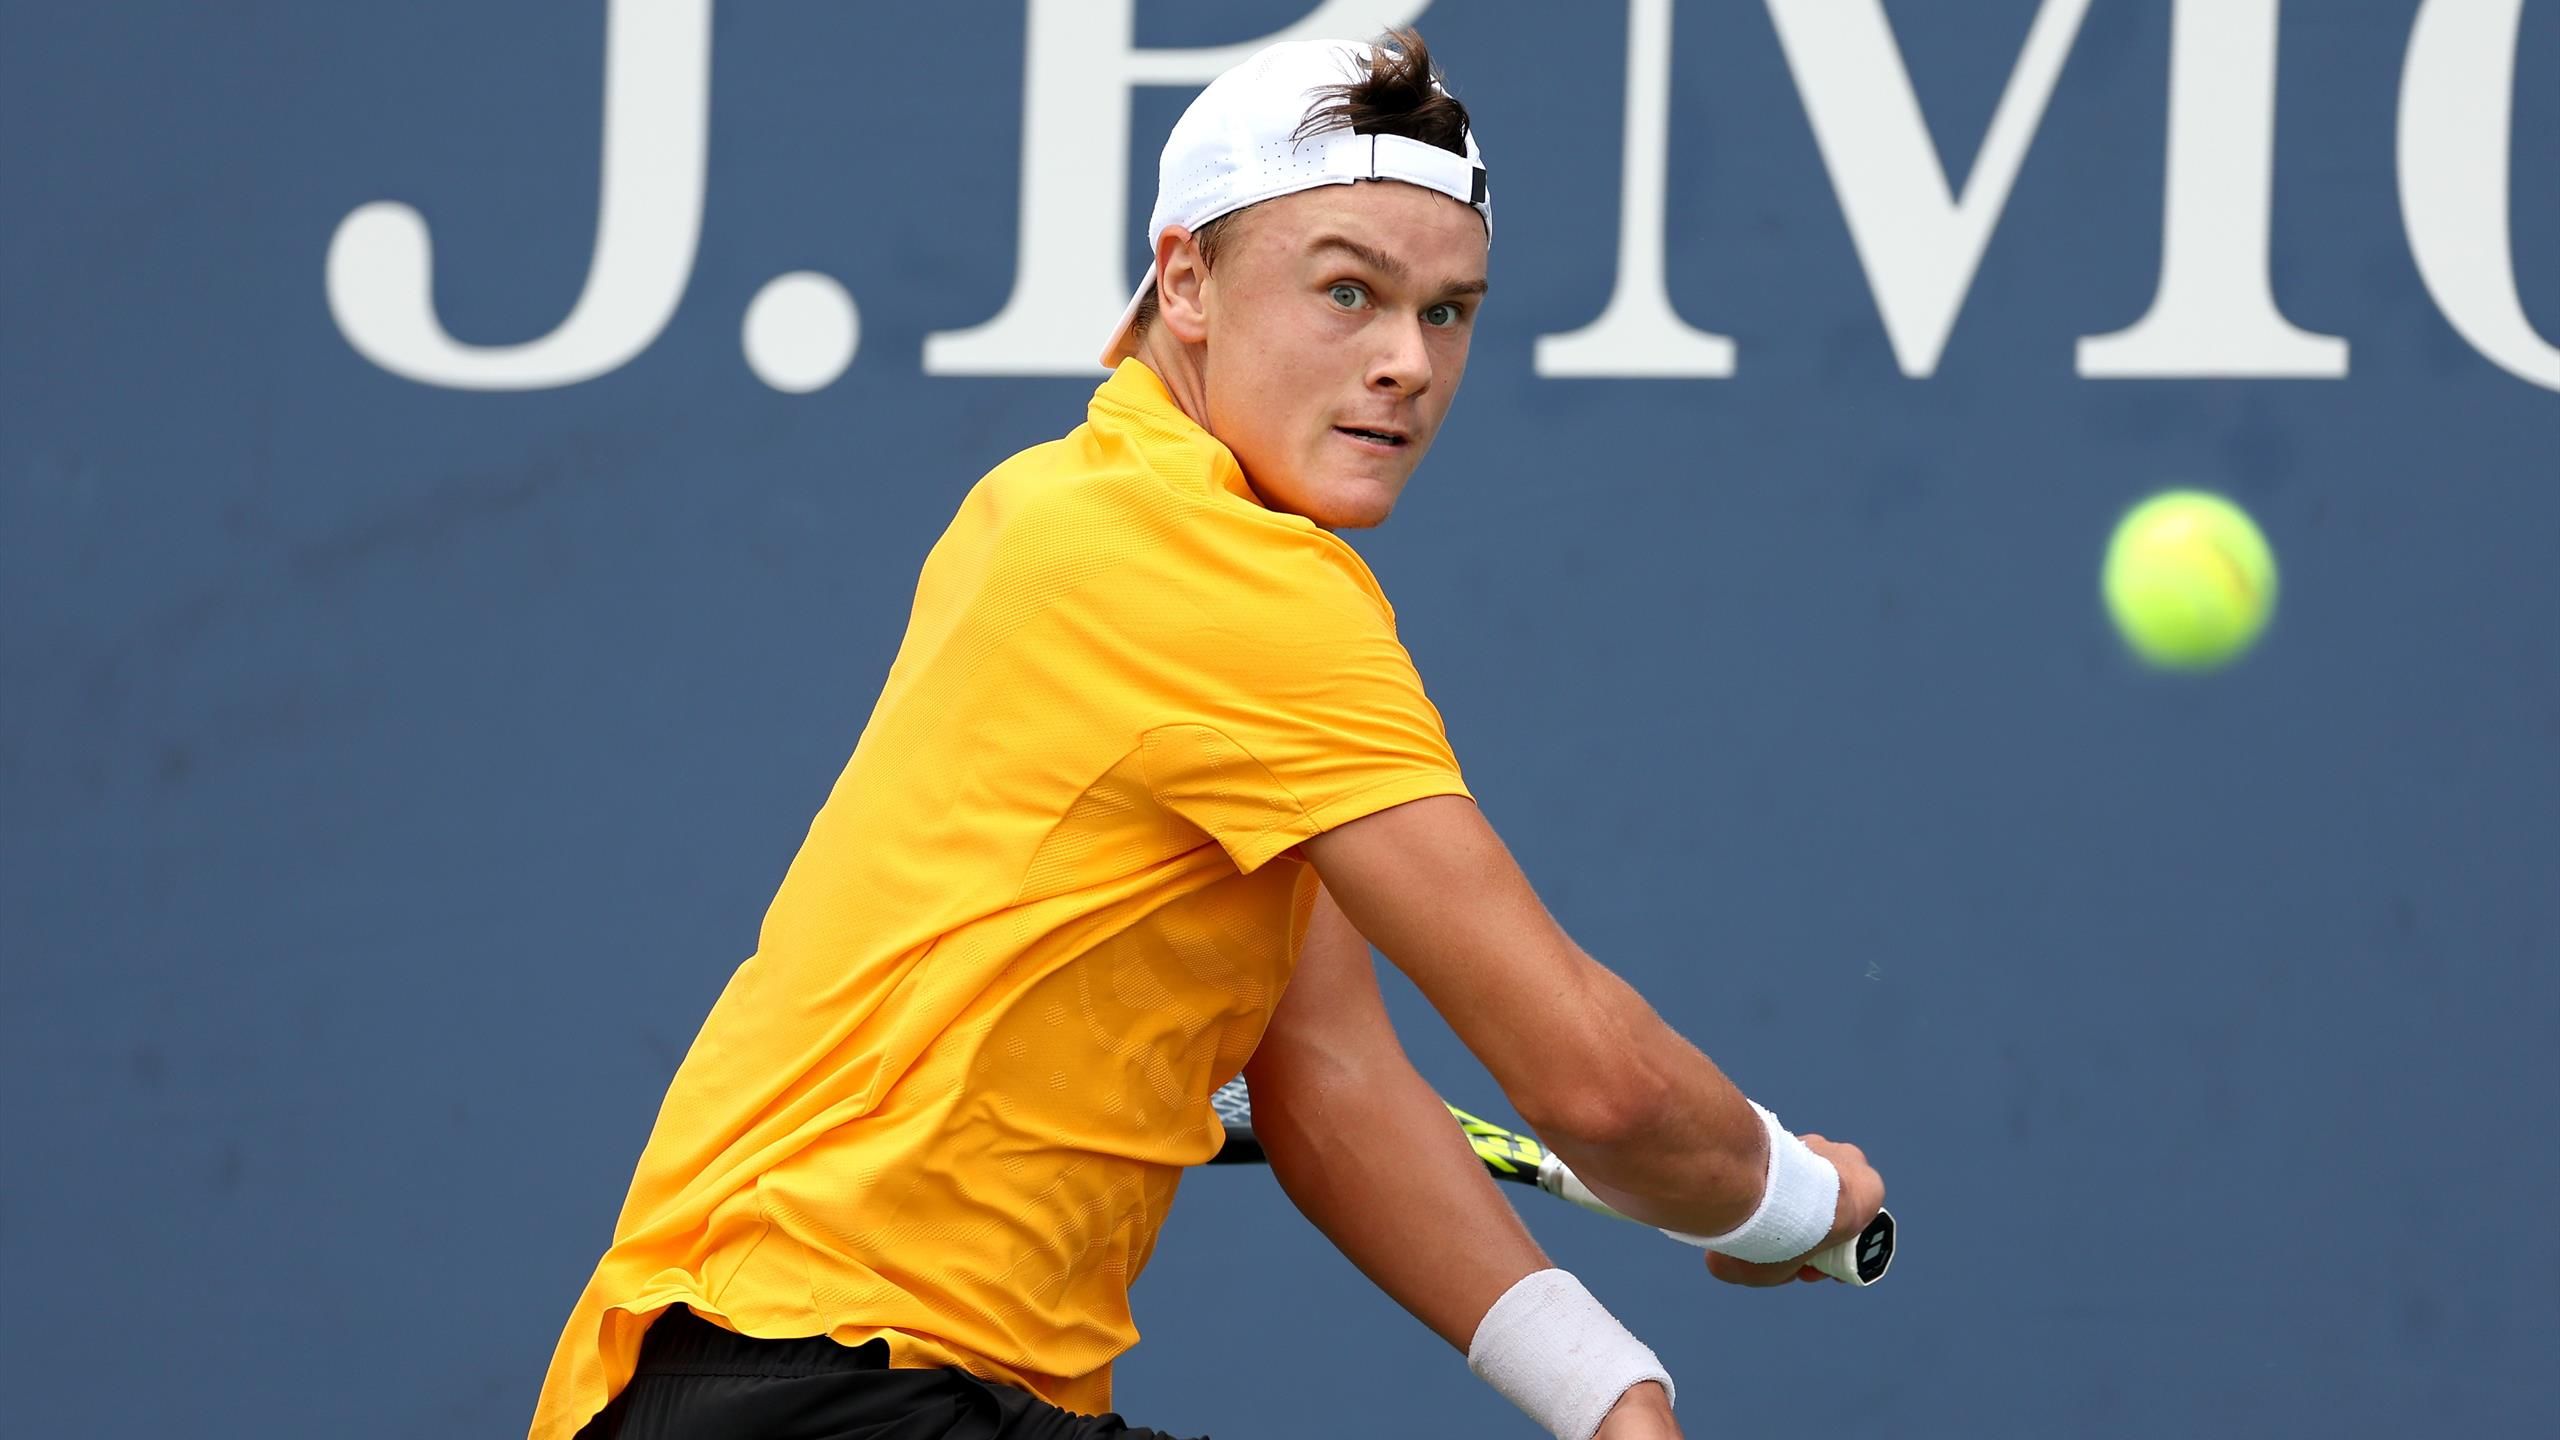 US Open 2023 Holger Rune stunned, Dominic Thiem tames Alexander Bublik for first Grand Slam win in over two years